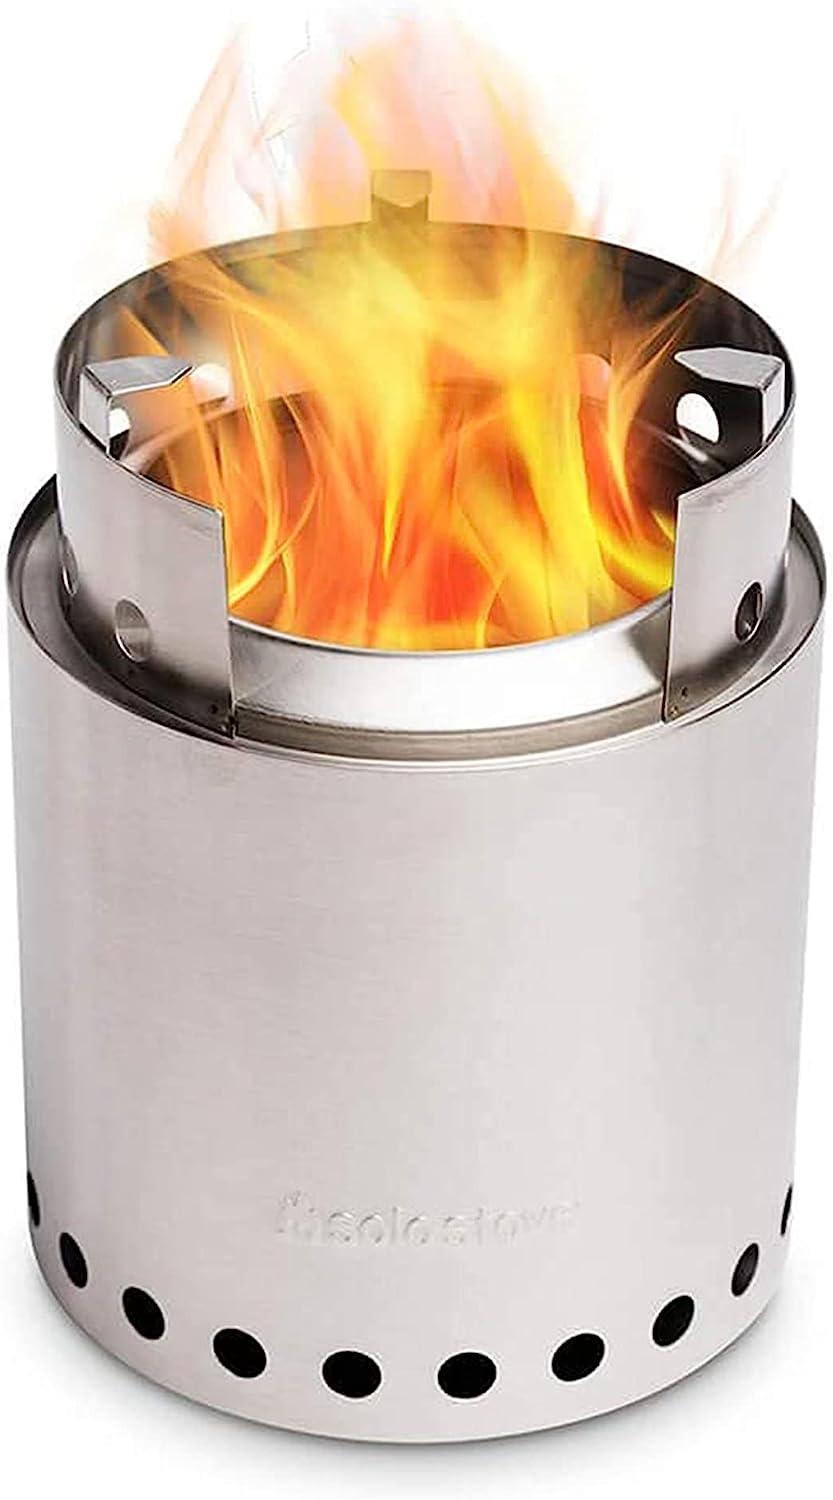 Solo Stove Lite/Titan/Campfire Camping Stove Portable Stove for Backpacking Outdoor Cooking Great Stainless Steel Camping Backpacking Stove Compact Wood Stove Design-No Batteries or Liquid Fuel Canisters Needed - TRAPSKI, LLC